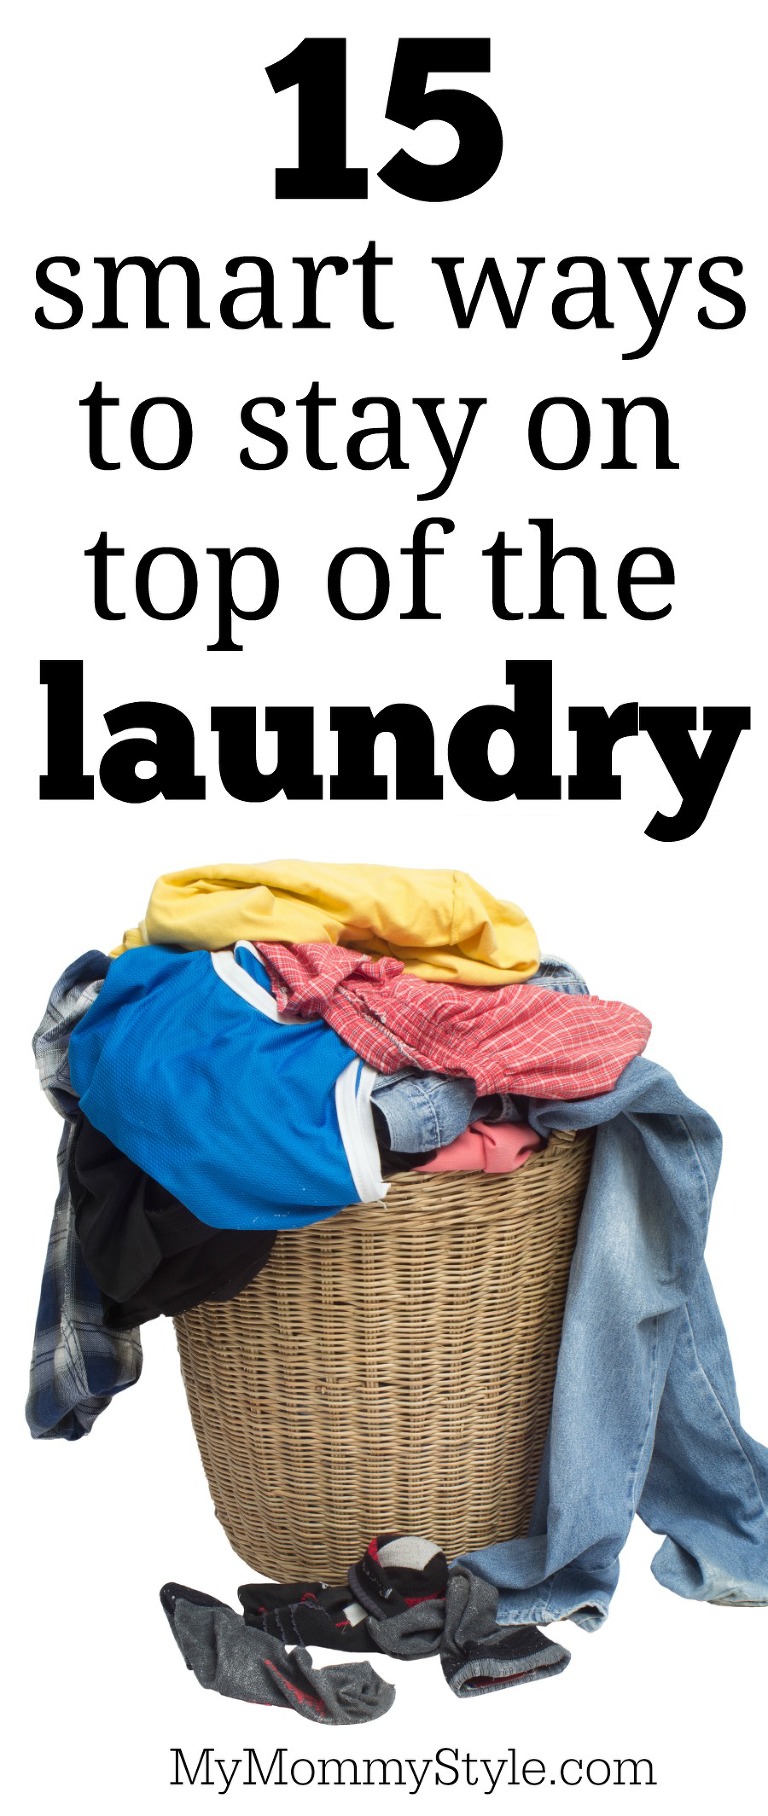 laundry tips to keep up with the laundry, the best ideas to get the laundry done